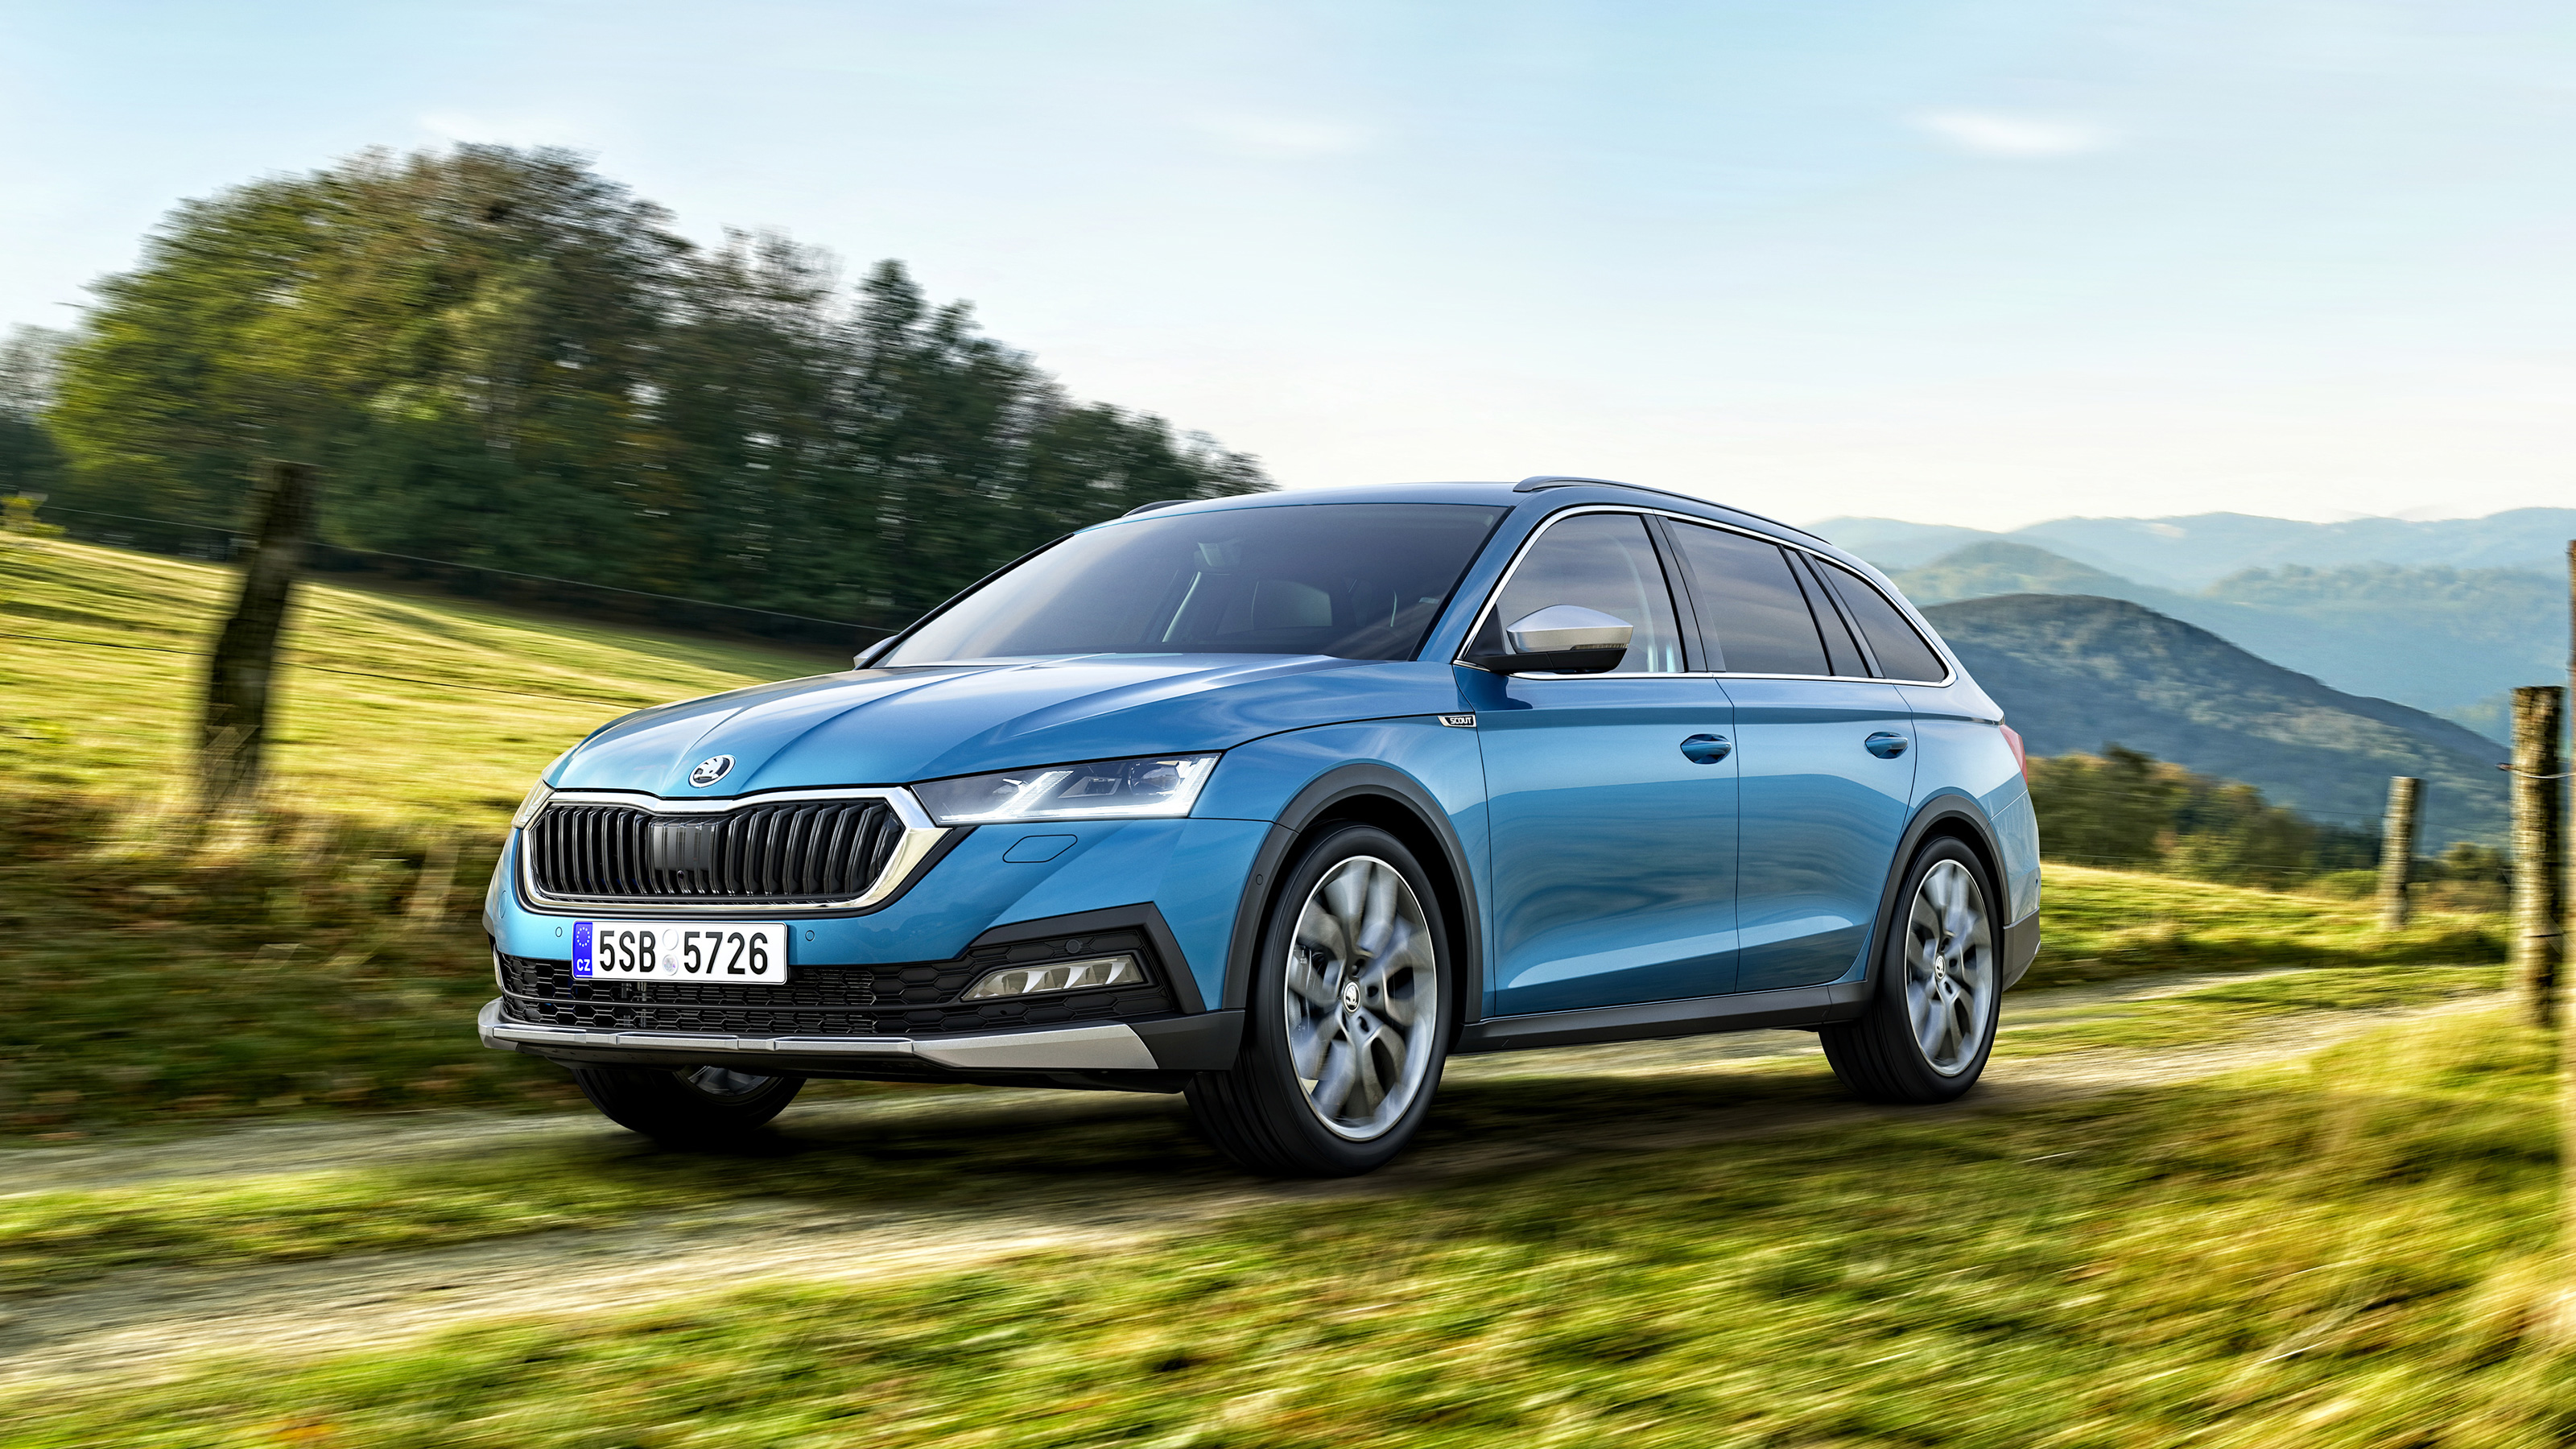 New 2020 Skoda Octavia Scout set for July launch  Auto 